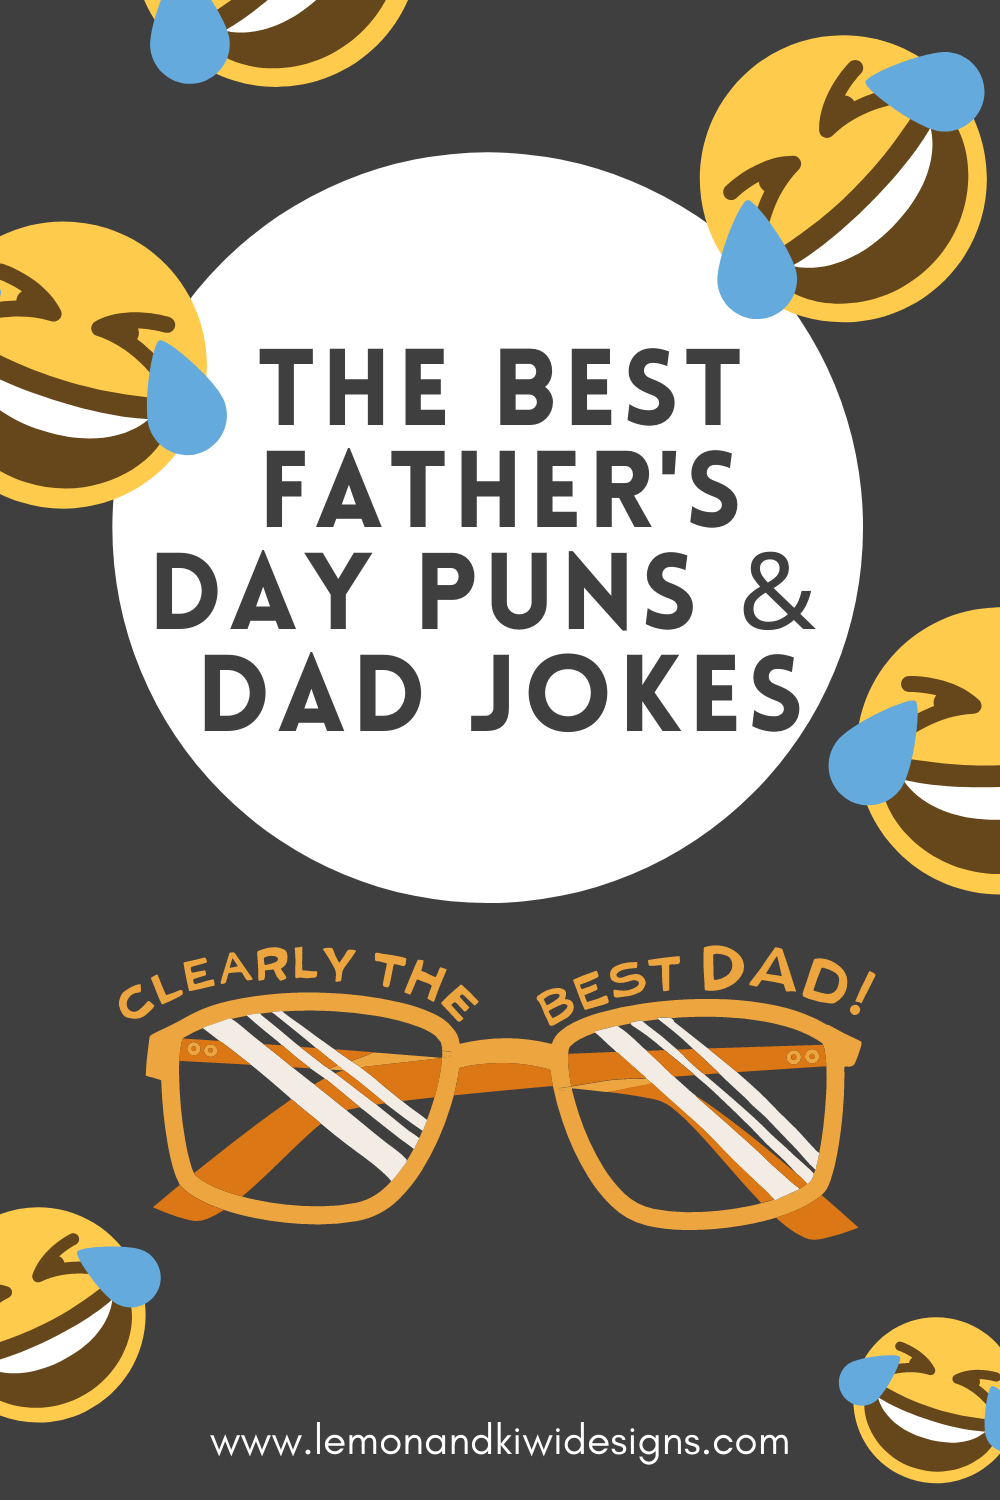 45 Hilarious Dad Jokes And Puns For Fathers Day — Lemon And Kiwi Designs